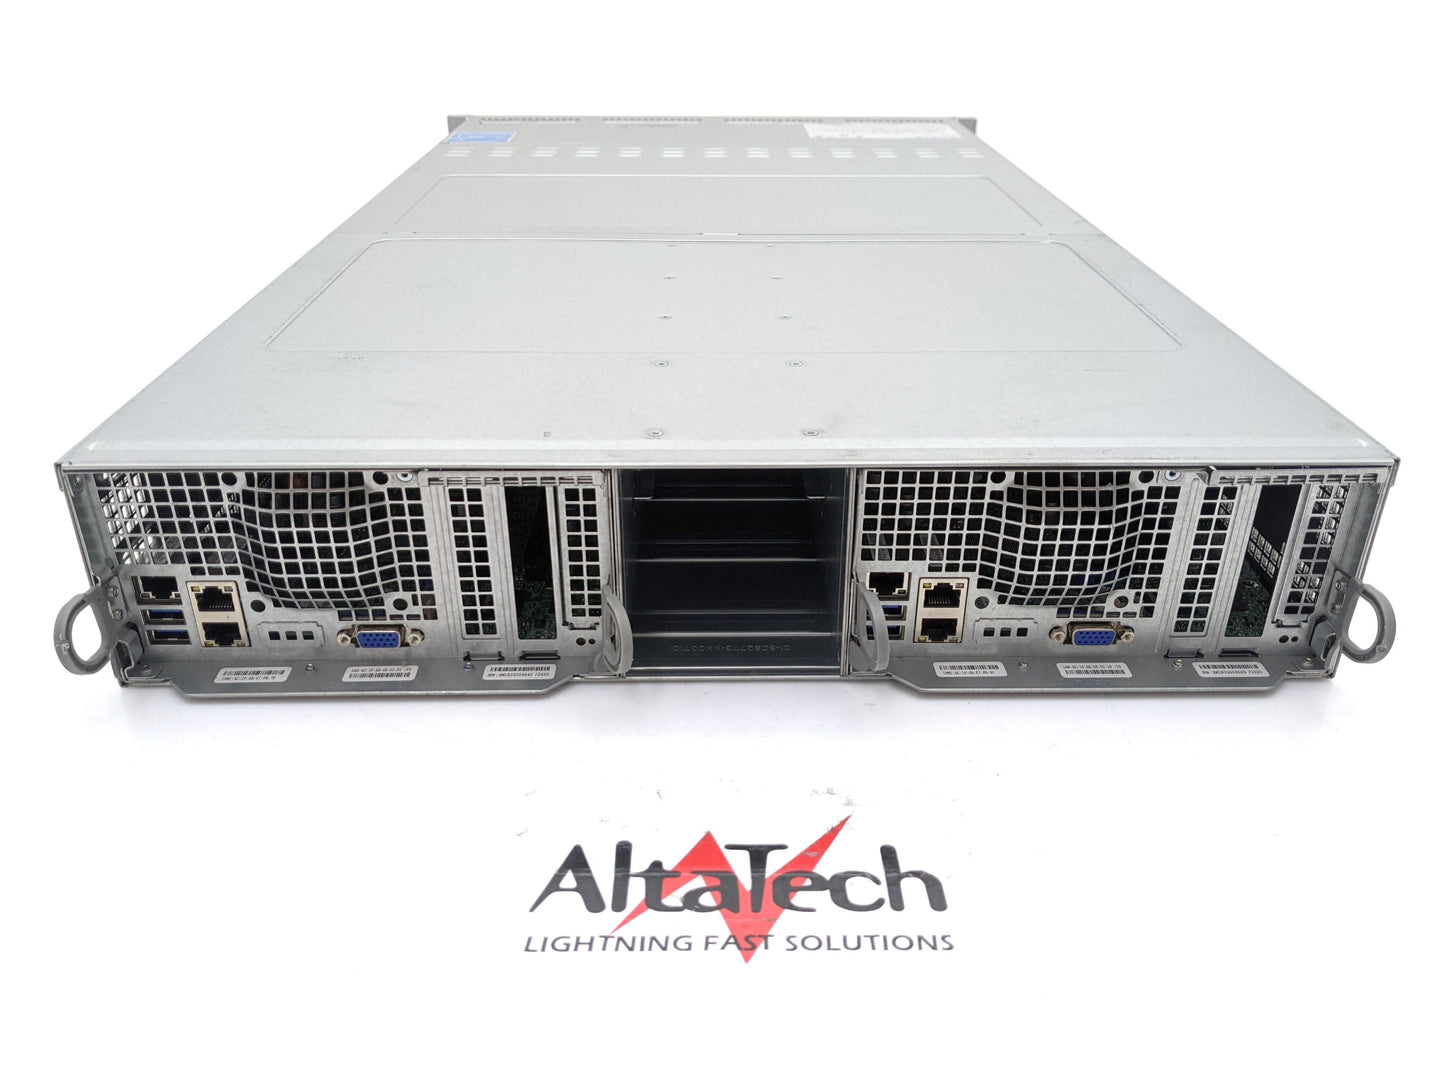 SuperMicro SYS-6028TP-DNCR 2U 12x 3.5" Bay CTO SuperServer w/ X10DRT-P, Used